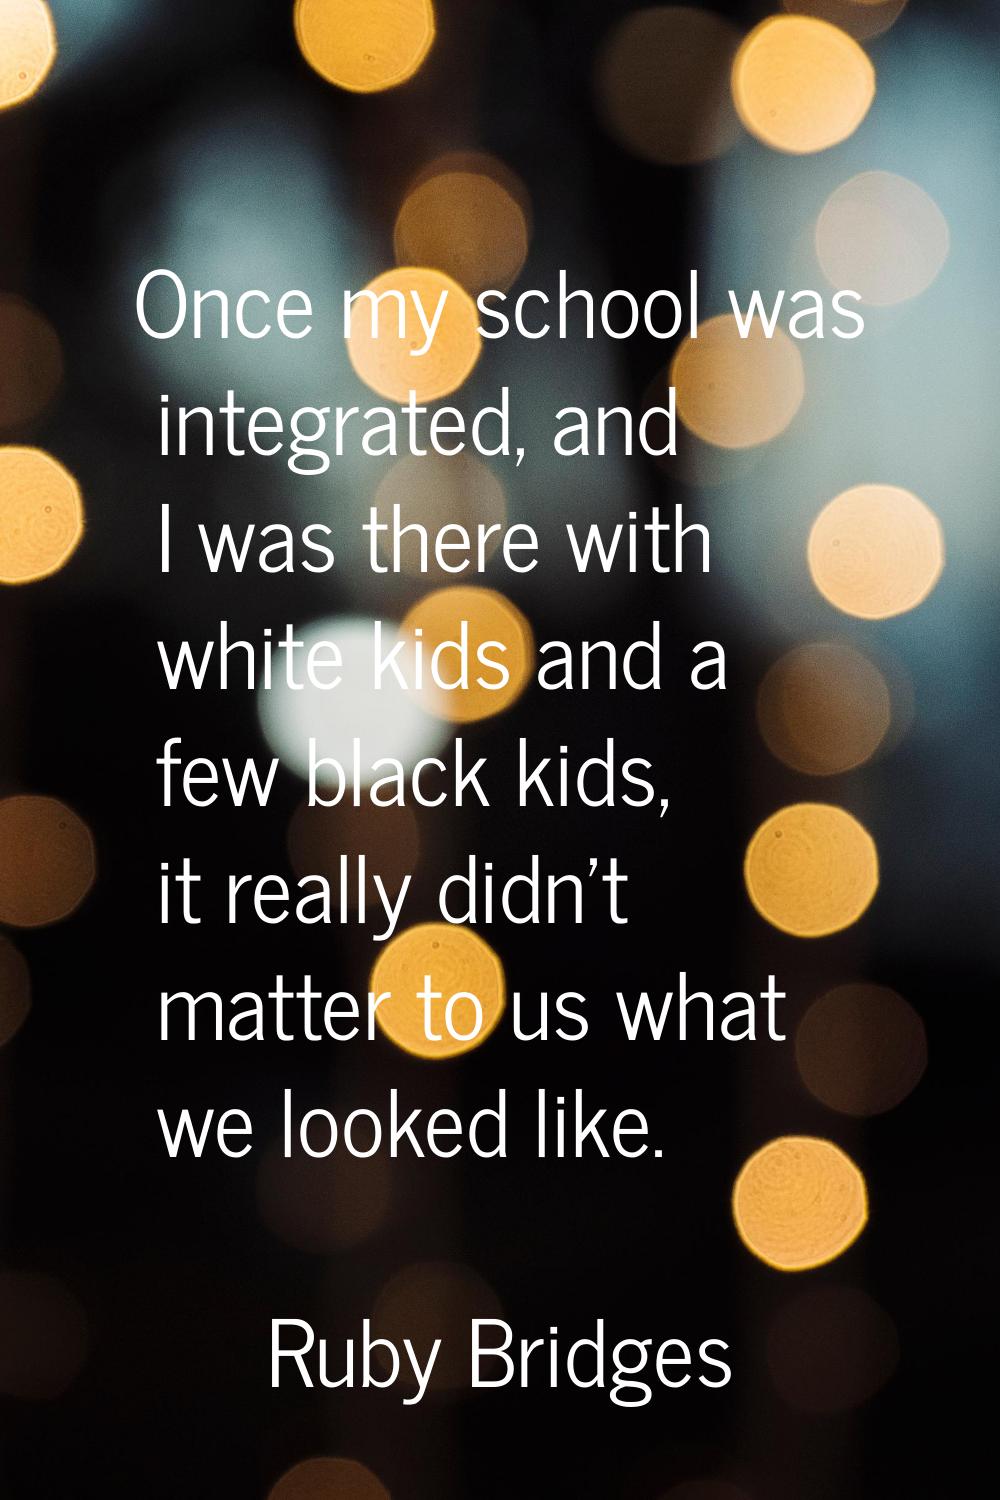 Once my school was integrated, and I was there with white kids and a few black kids, it really didn